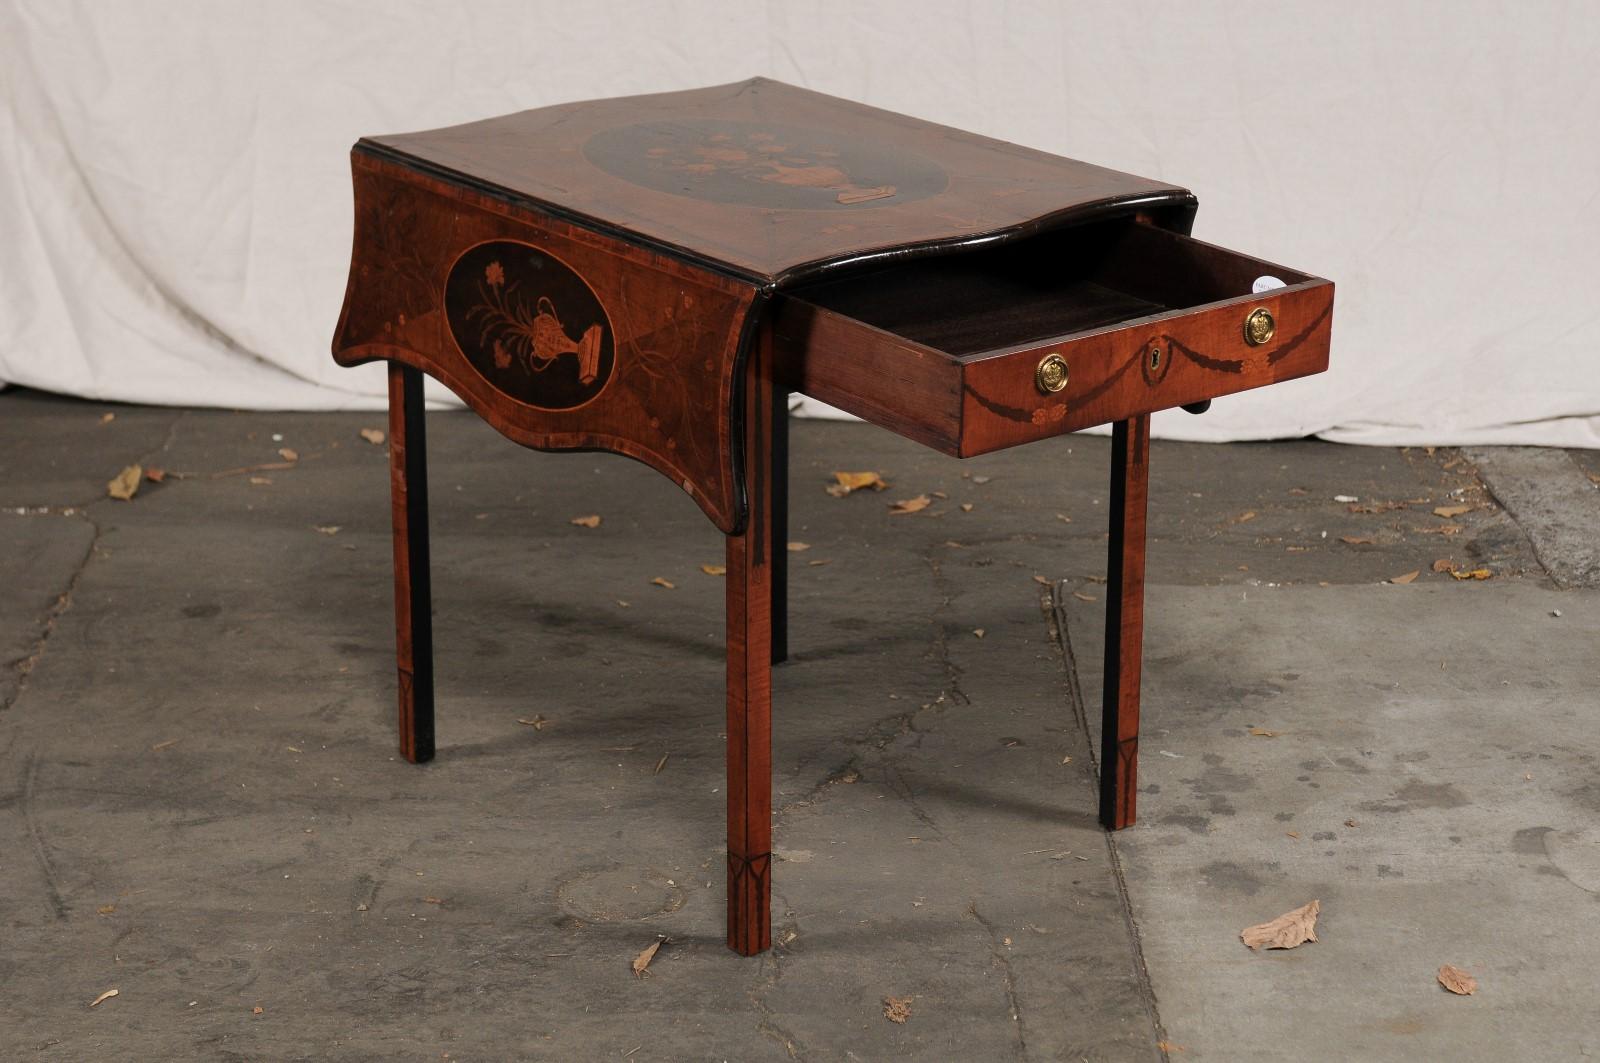 18th-19th Century English George III Mahogany Inlaid Pembroke Table (Englisch)